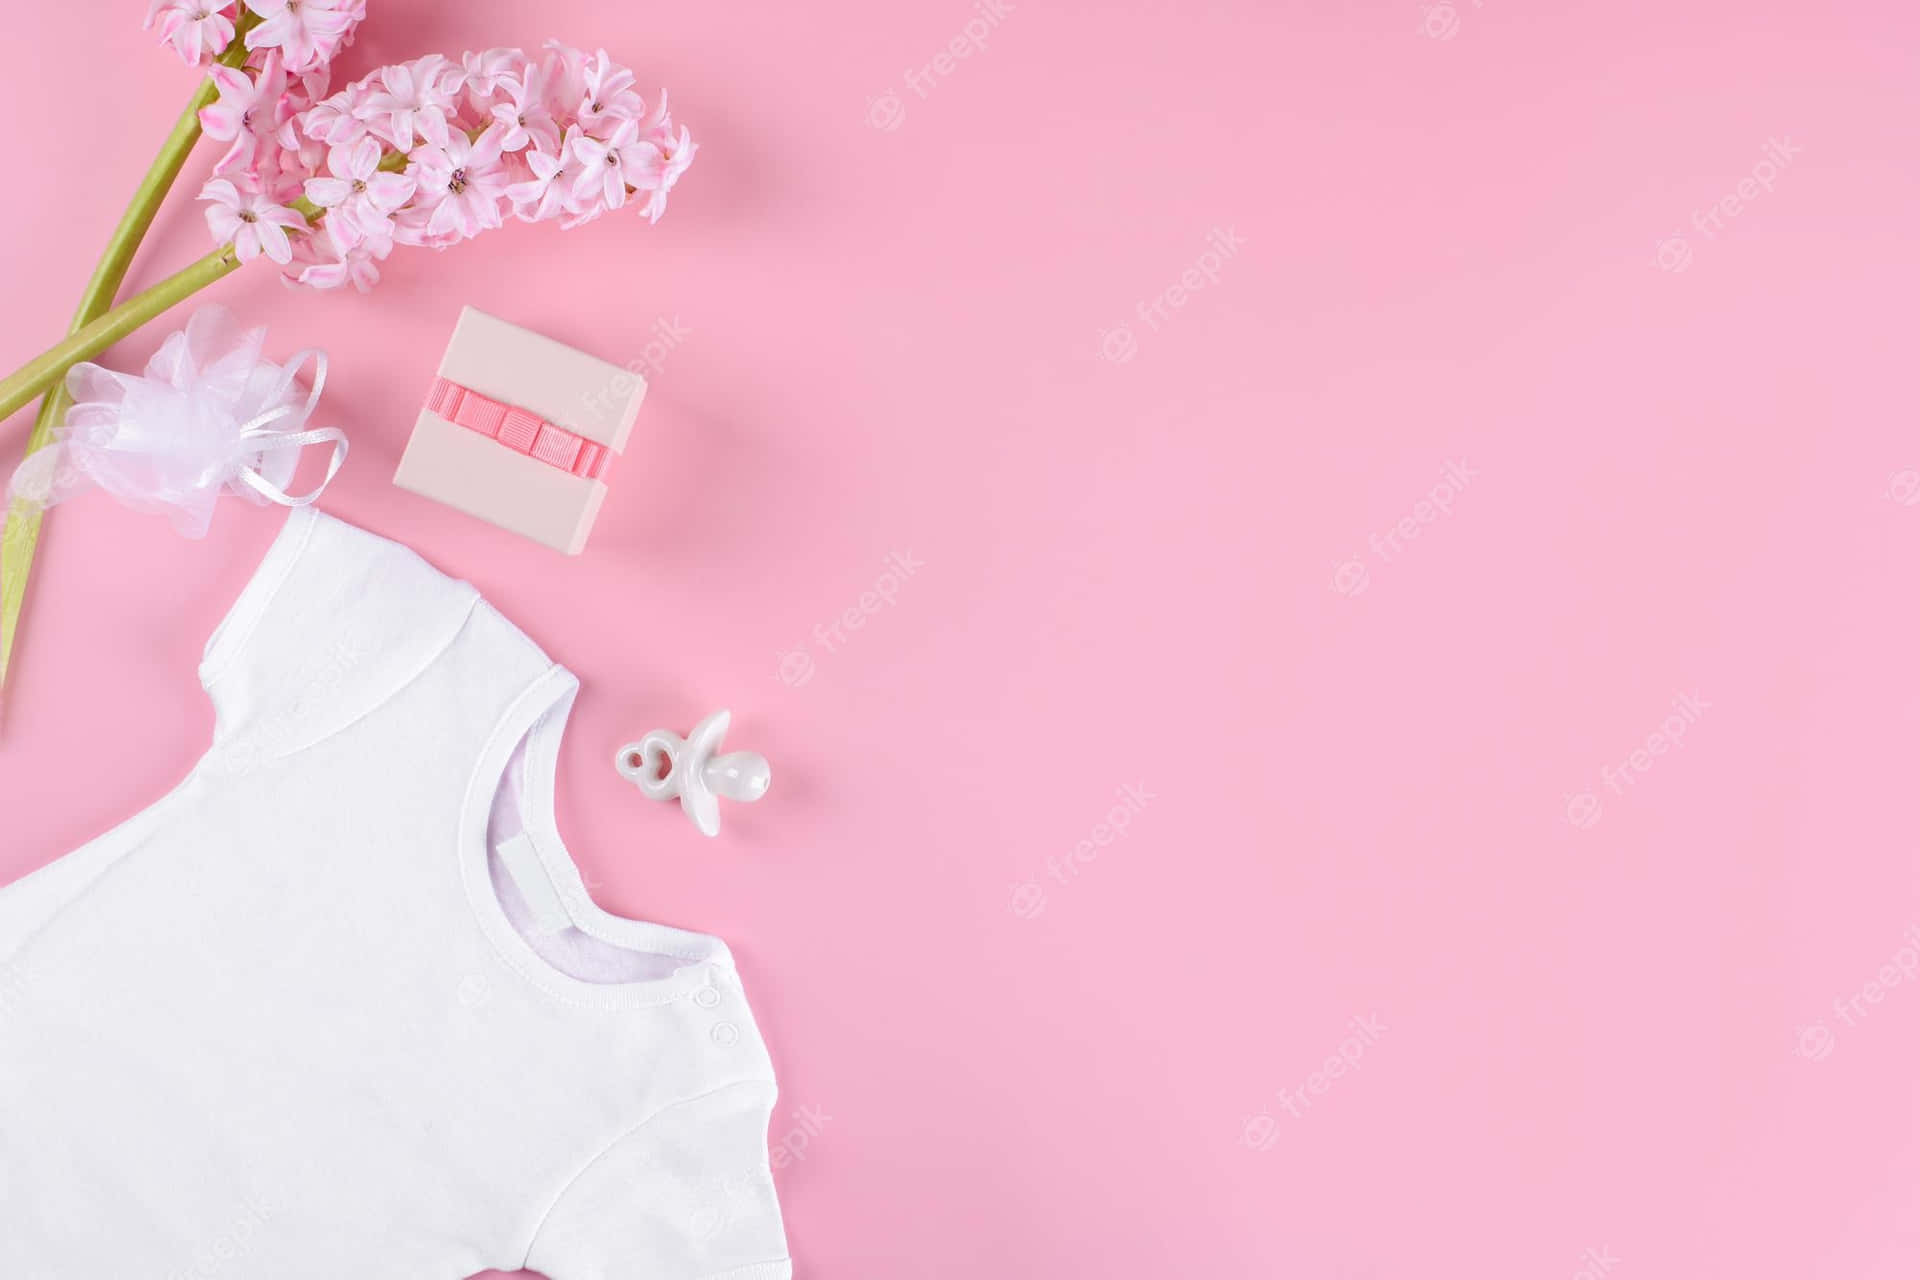 baby pink backgrounds for girls